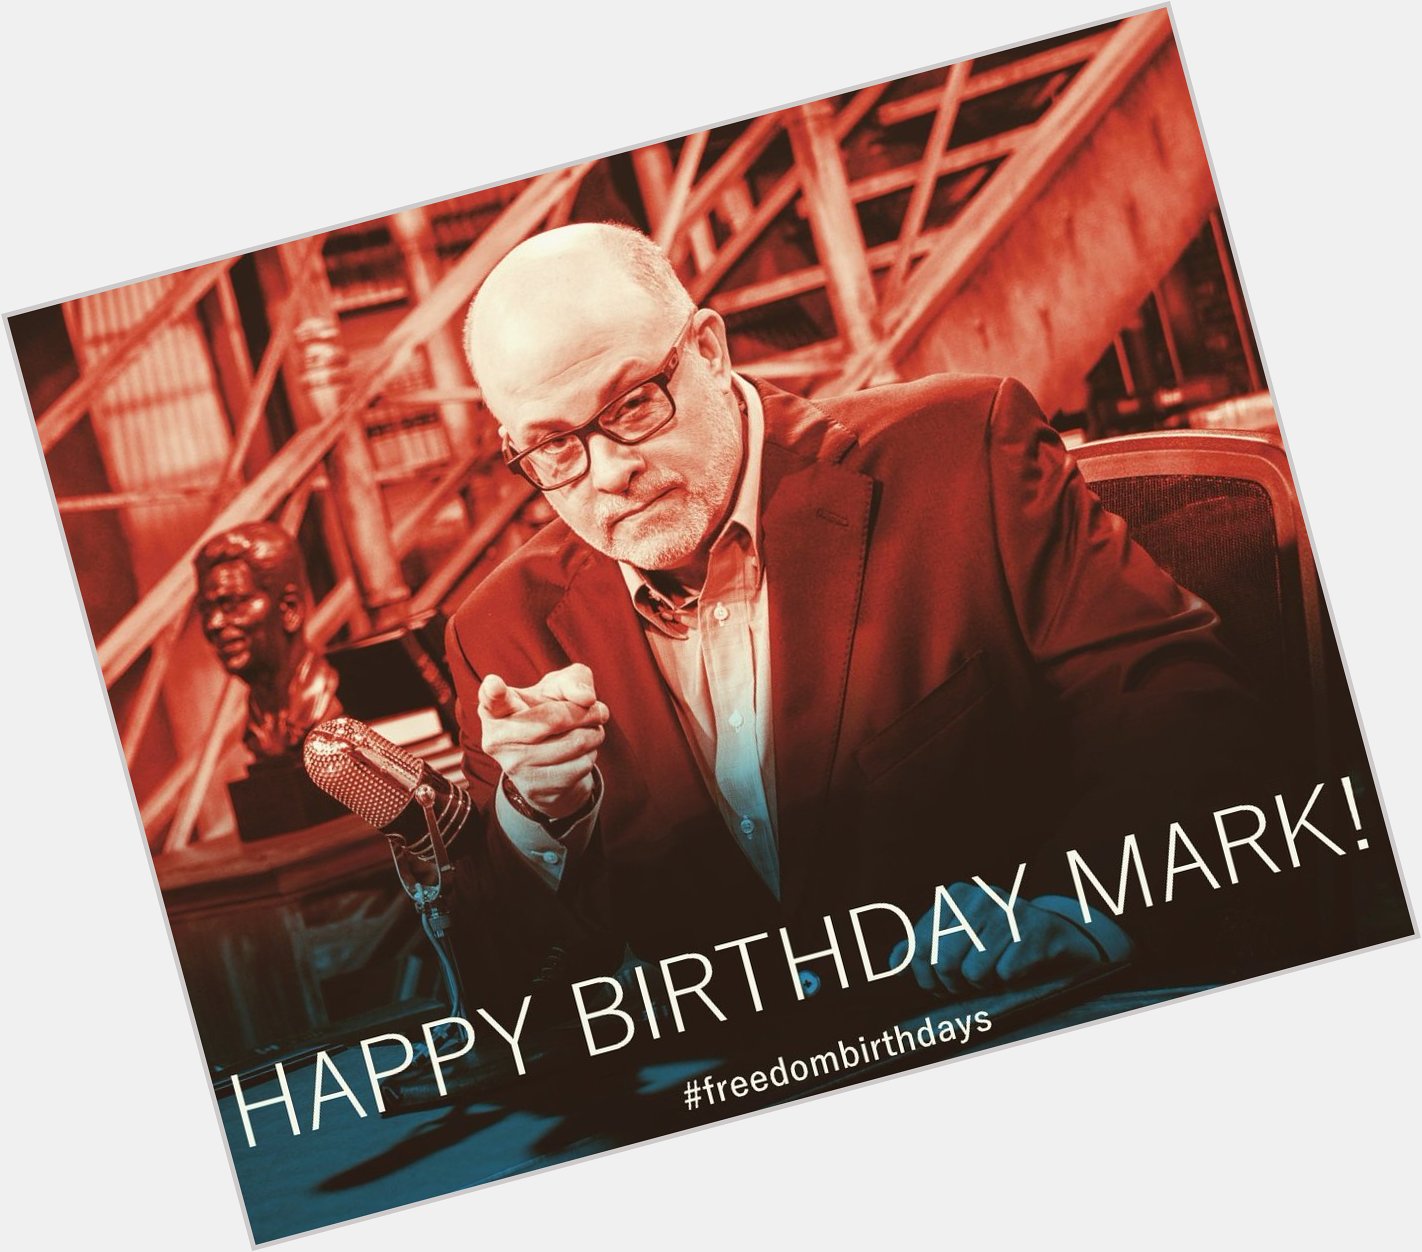 Join us in wishing a very happy birthday to our evening guy, Mark Levin!  